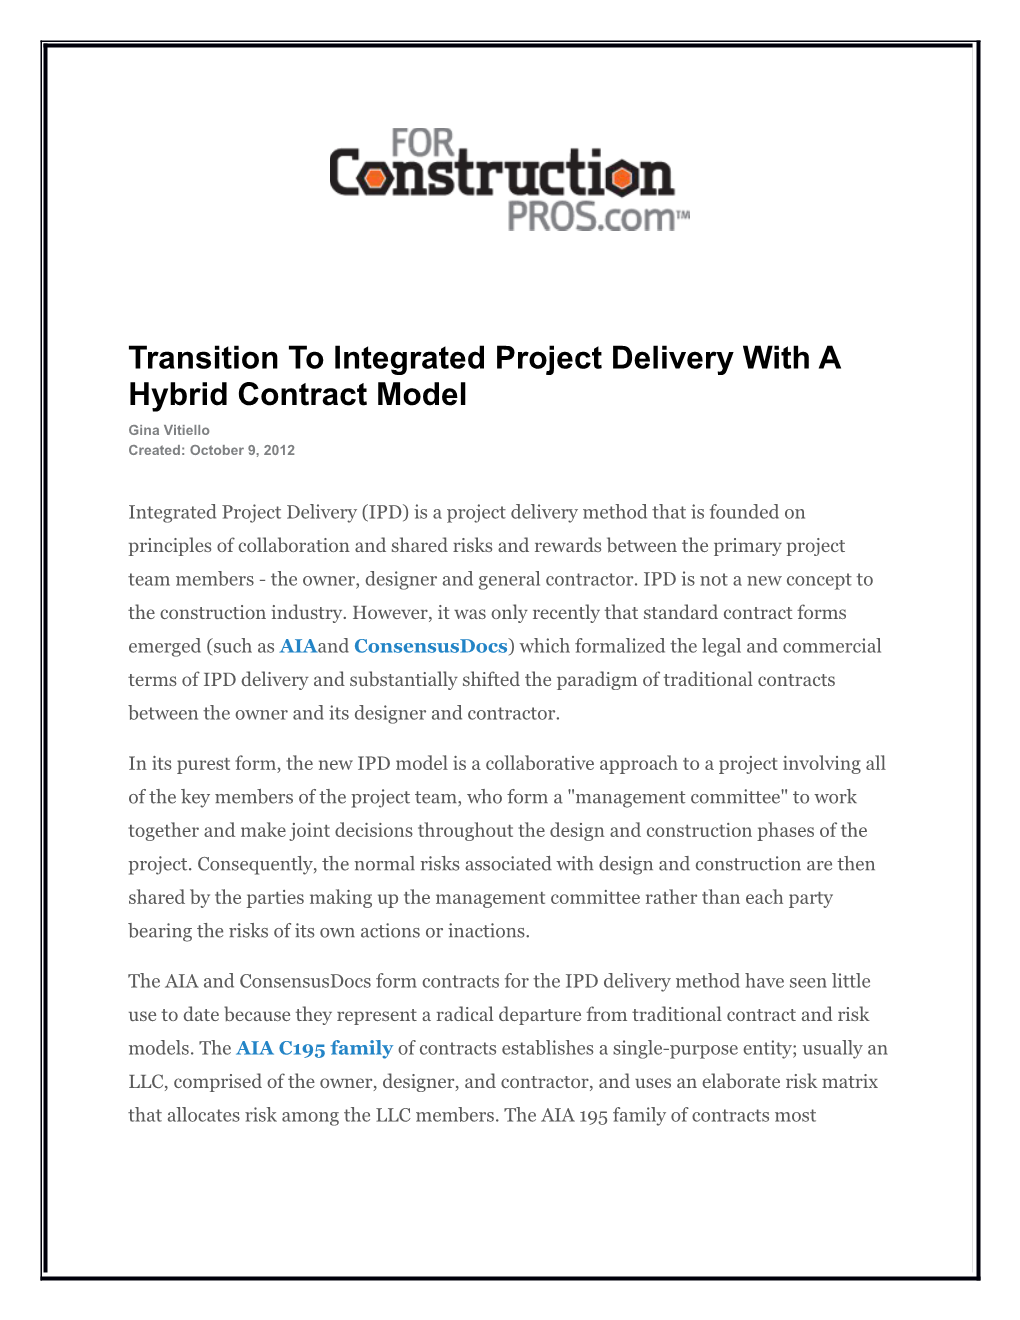 Transition to Integrated Project Delivery with a Hybrid Contract Model